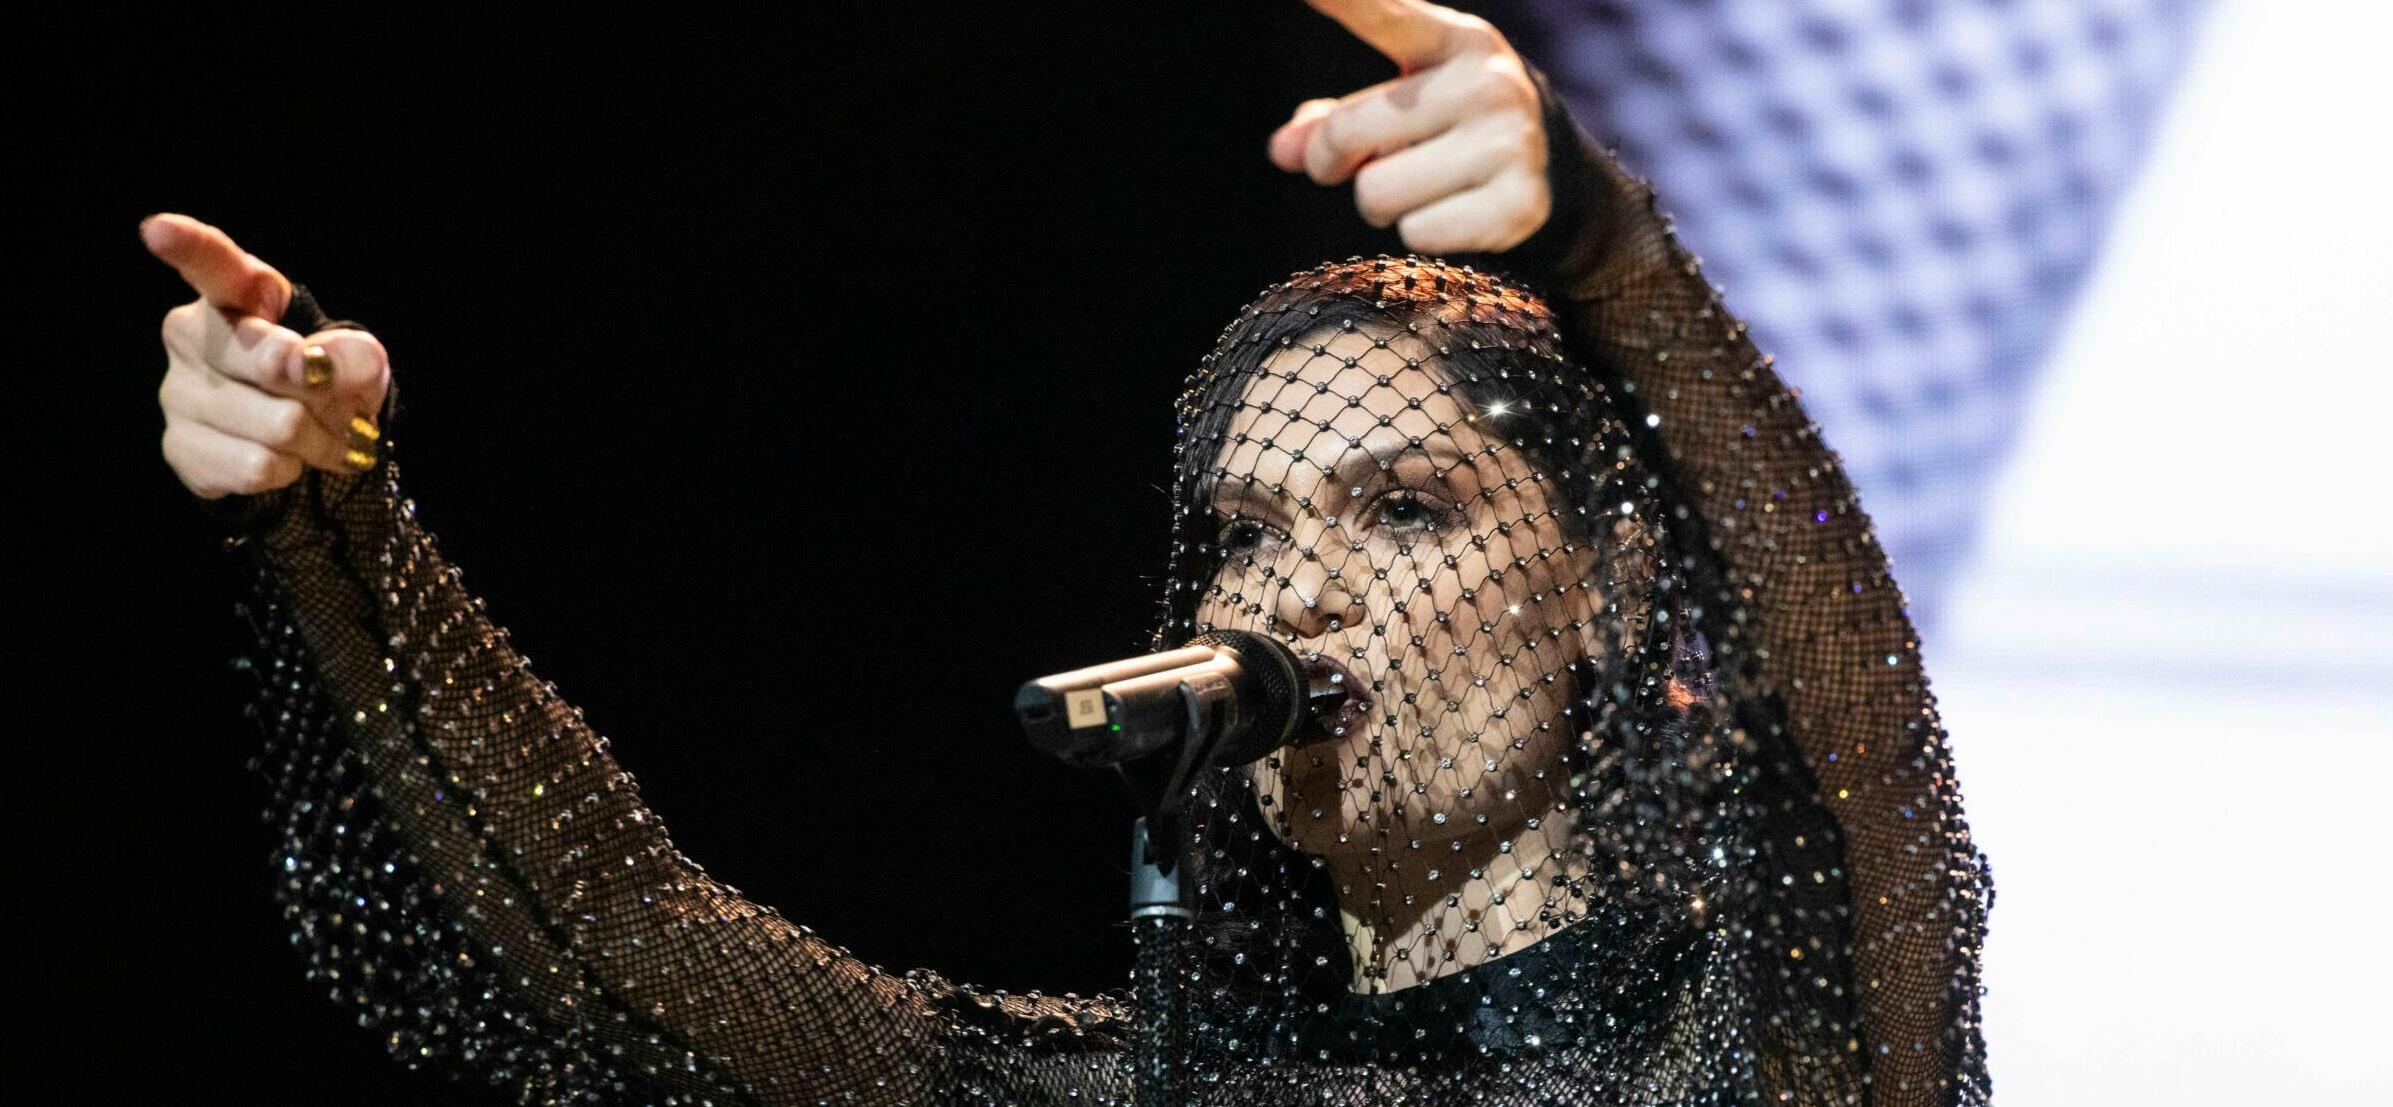 Jessie J performing on her R.O.S.E tour at The Royal Albert Hall, London - 13th November 2018